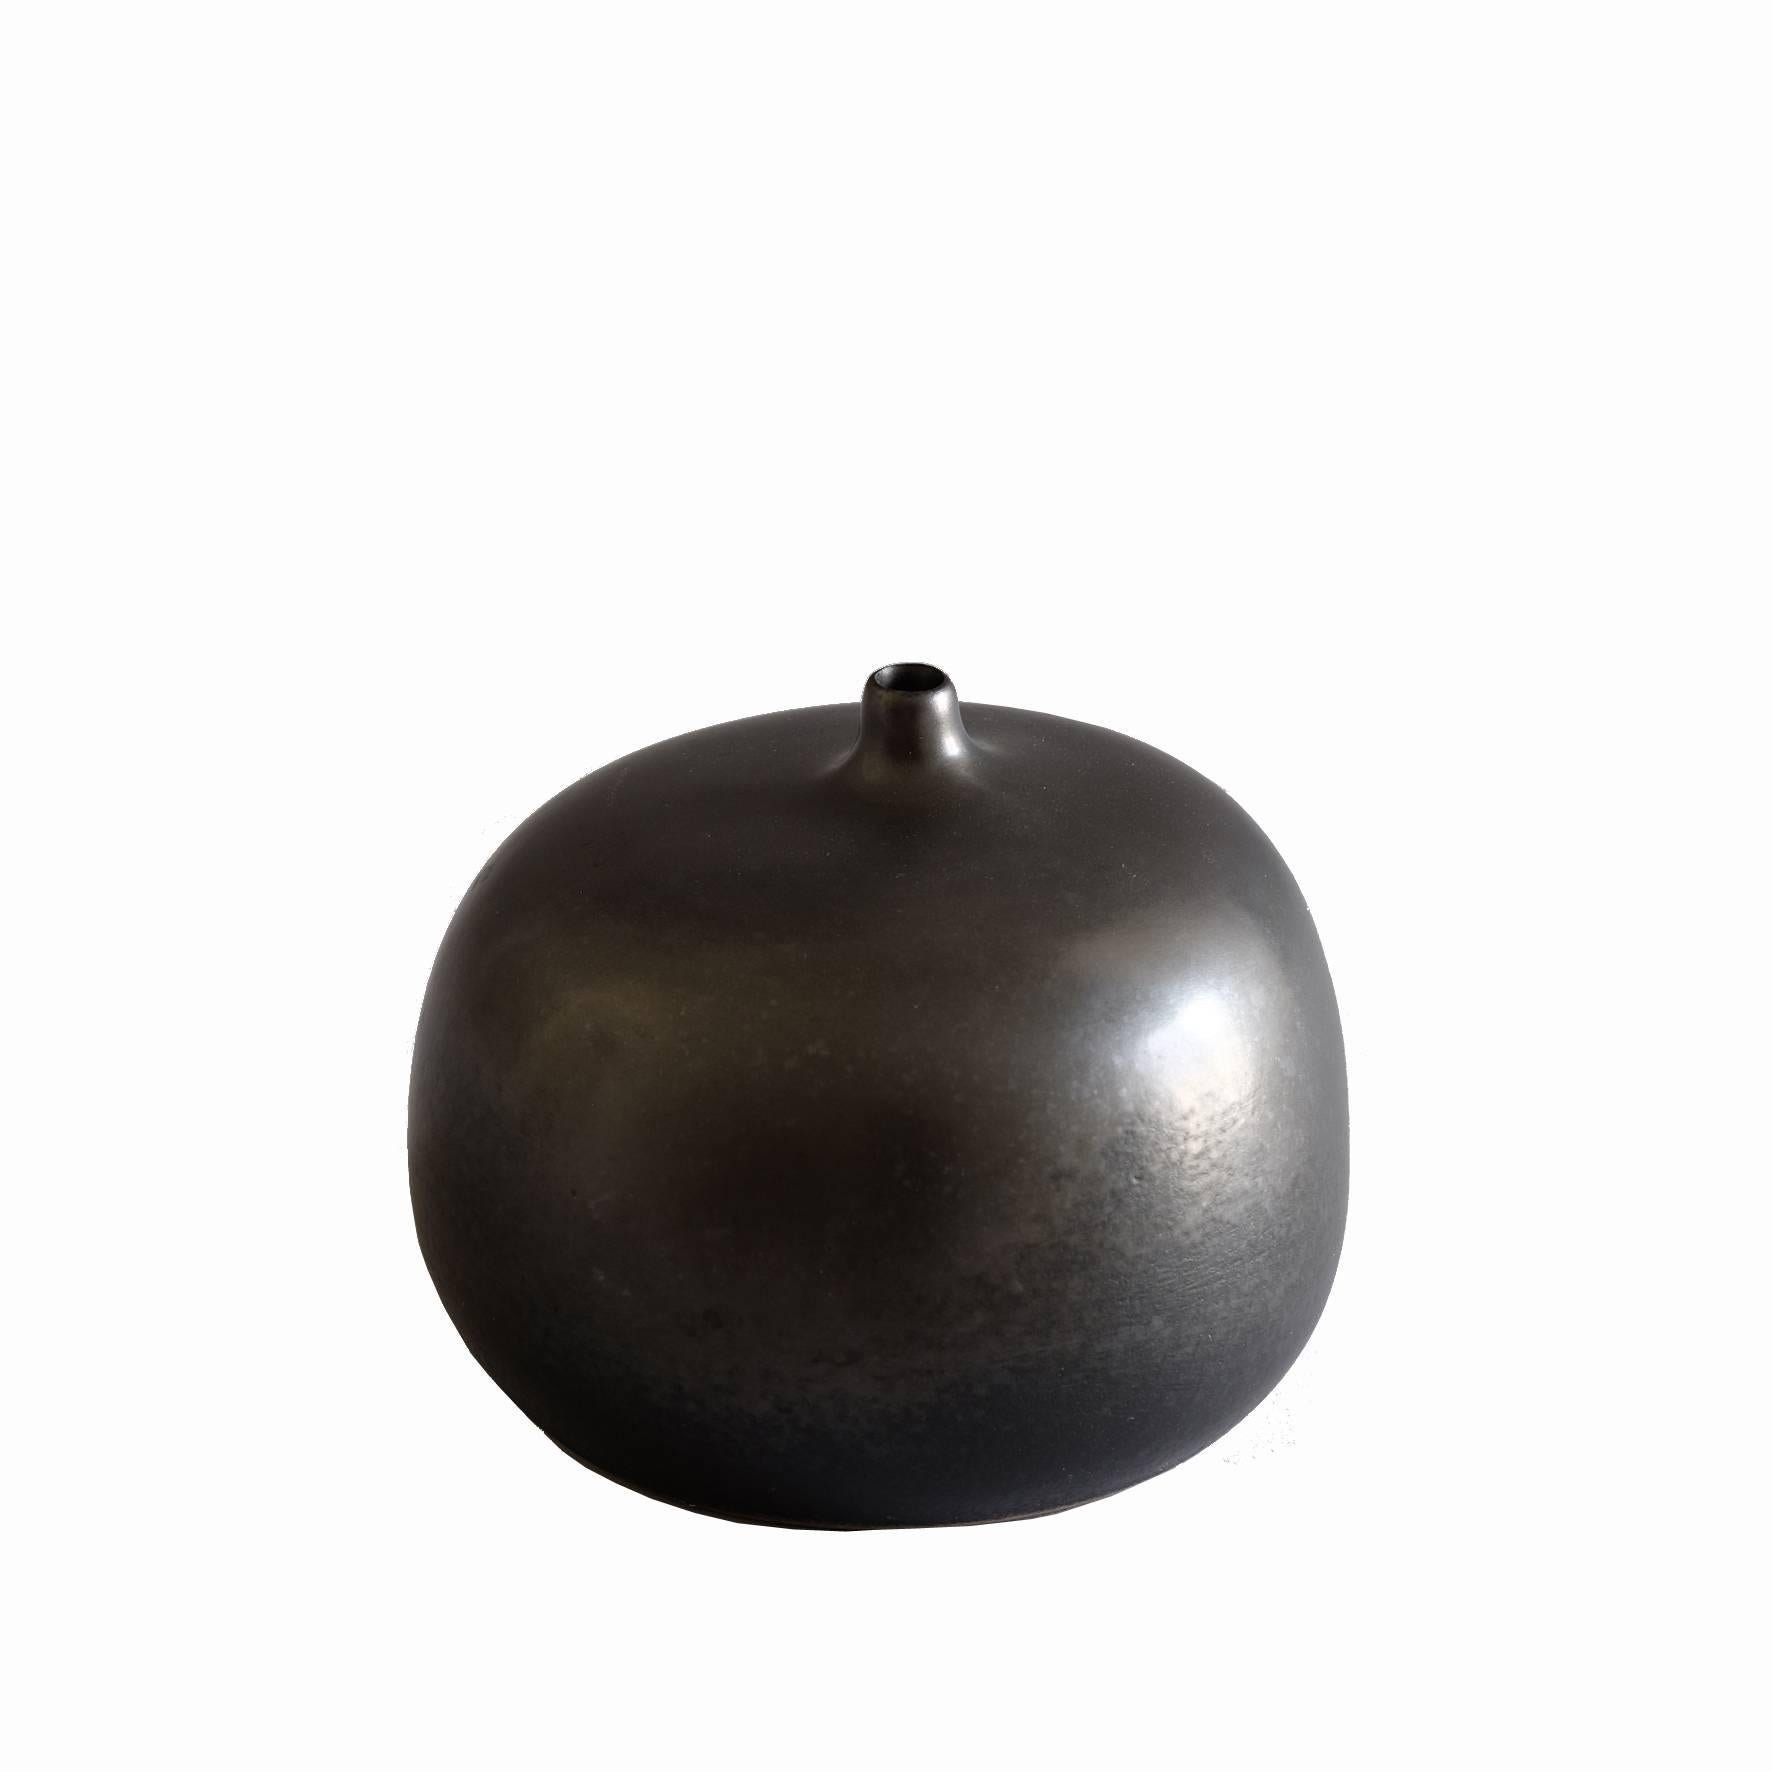 An apple shape ceramic vase with a black cover.
Signed underneath “Jouve” and artist’s cypher “Alpha”.